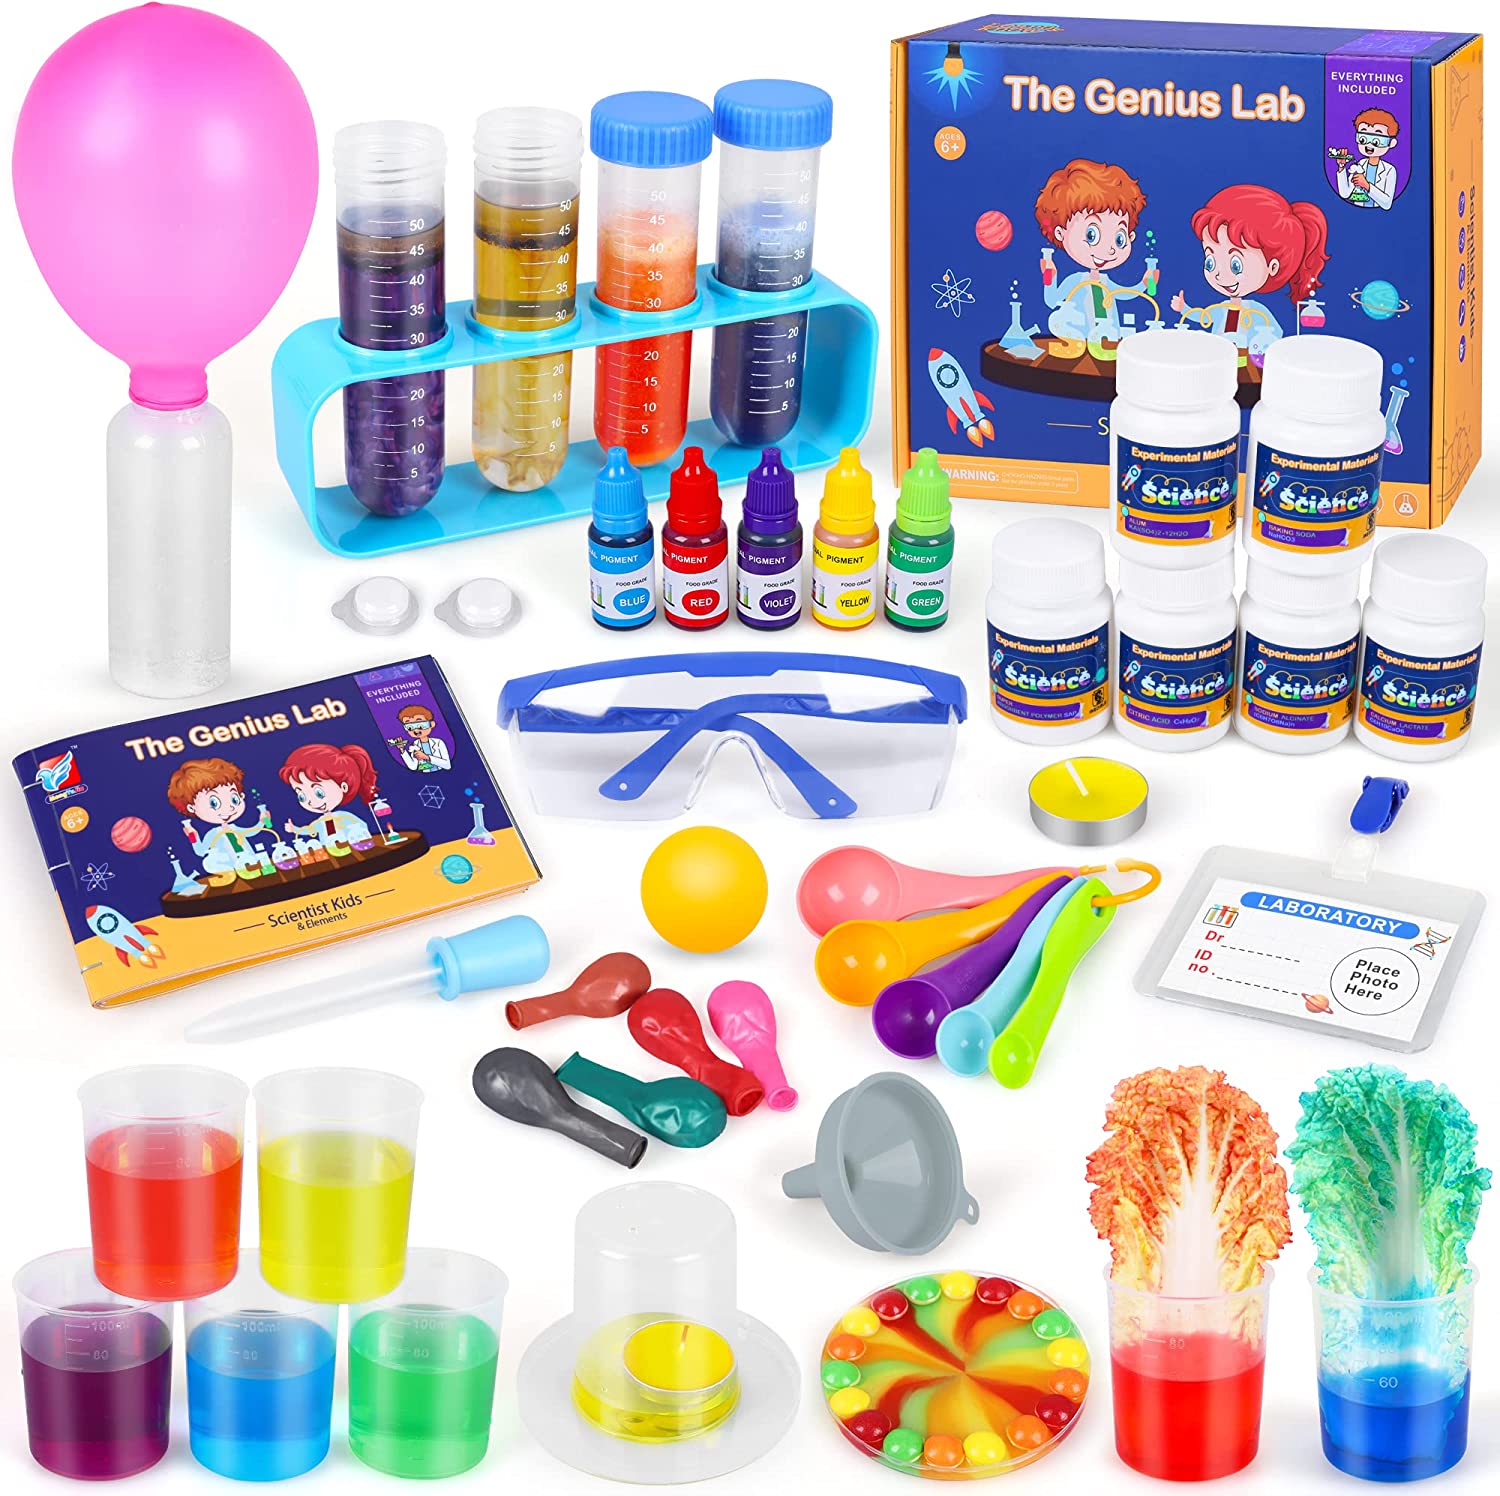  UNGLINGA 30 Experiments Science Kit for Kids with Lab Coat,  Chemistry Set STEM Toys Gifts for 3 4 5 6 7 8 9 10 Years Old Boys Girls,  Scientist Costume Role Play Tools Educational Learning Set : Toys & Games